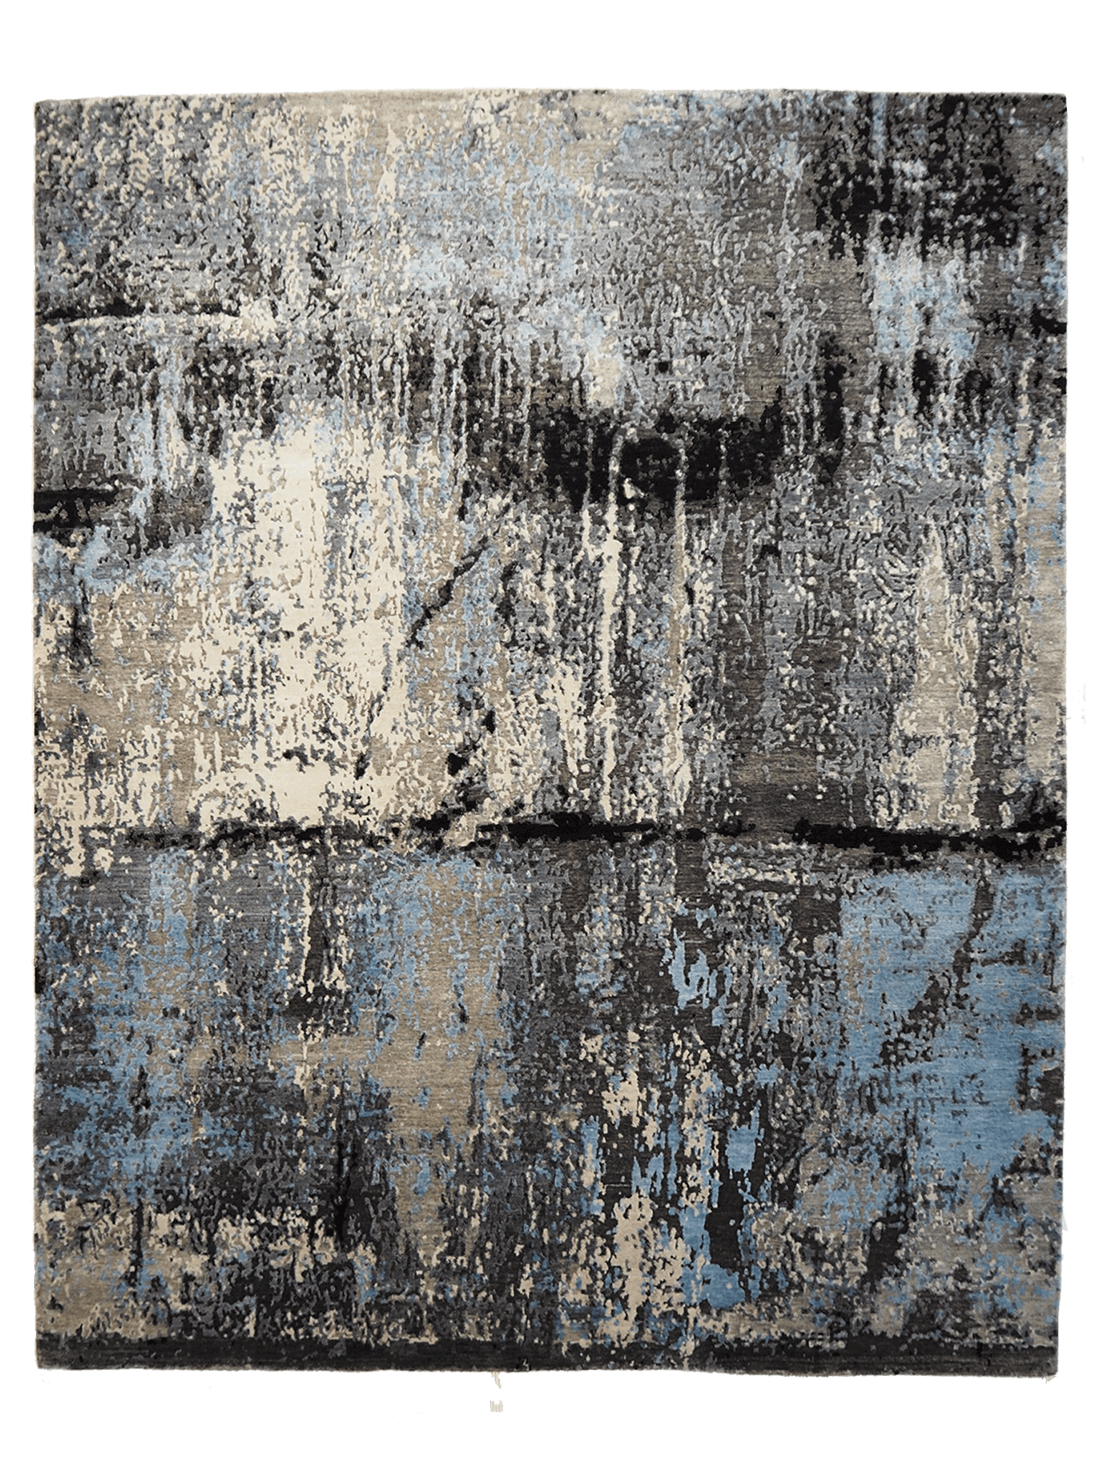 abstract area rug in grey, beige and blue